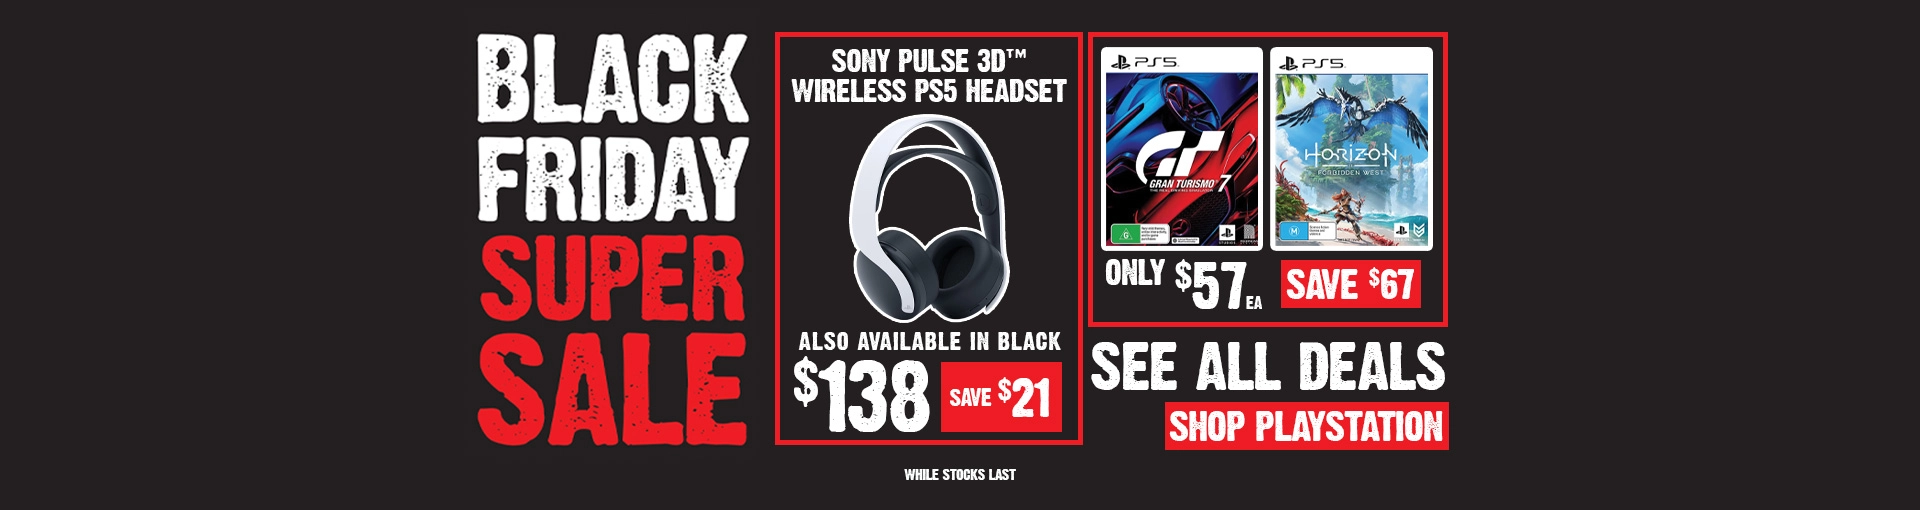 EBGames Black Friday deals - Up to 50% OFF Sony PS5 games & headsets